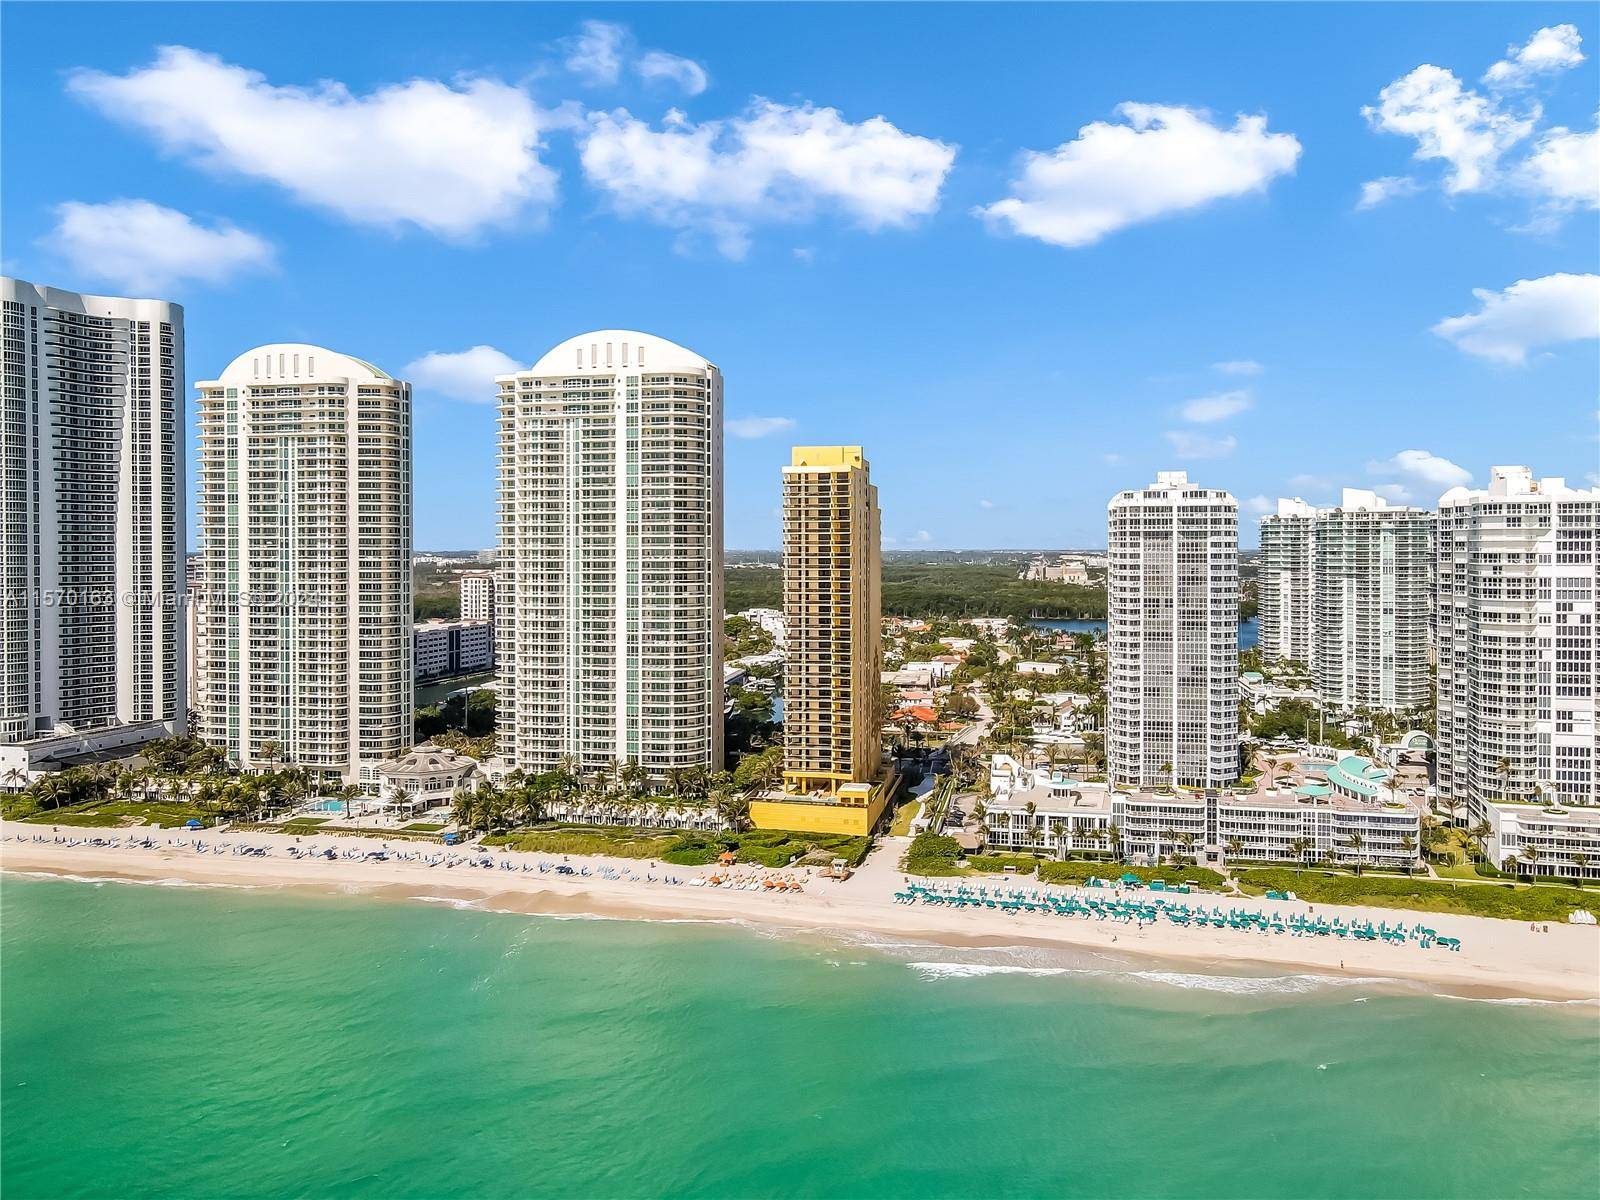 Luxury Awaits you in this Spectacular Beachfront Condo.